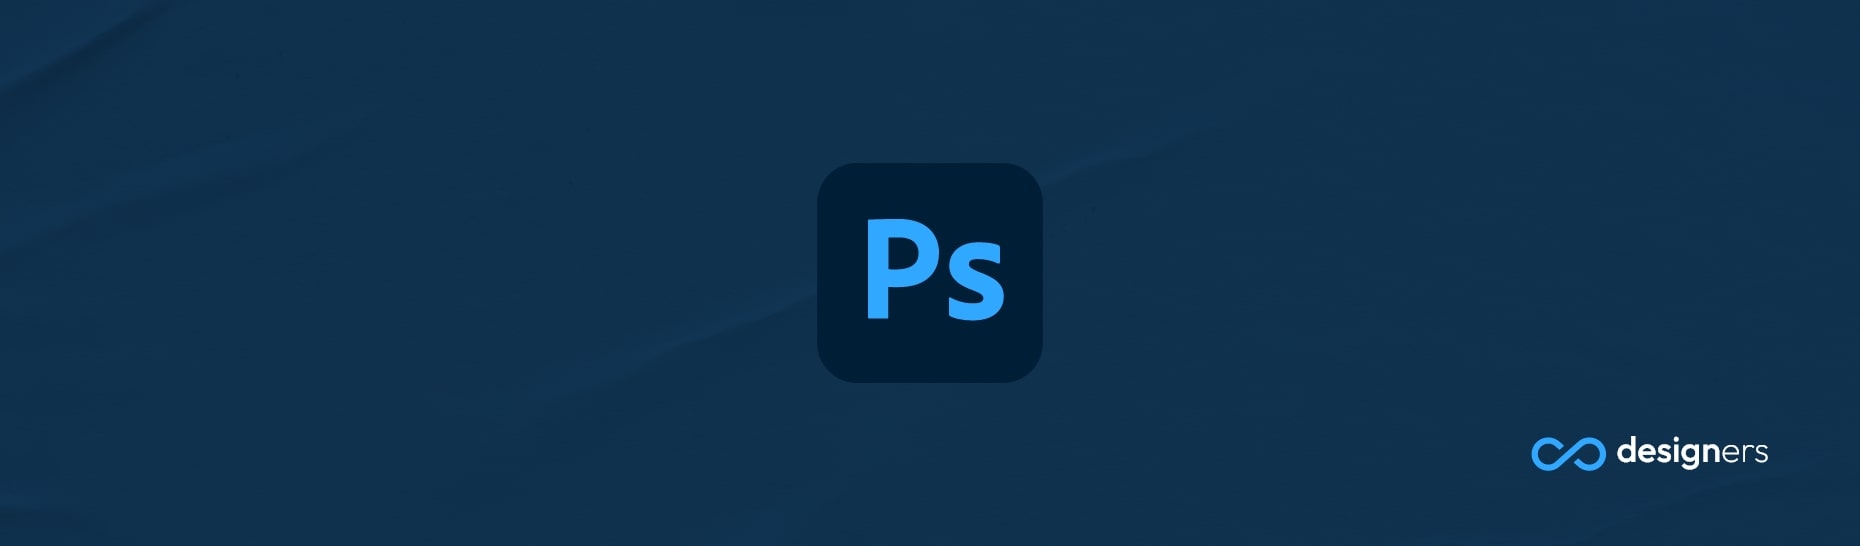 How Do I Convert Inches to Pixels in Photoshop?